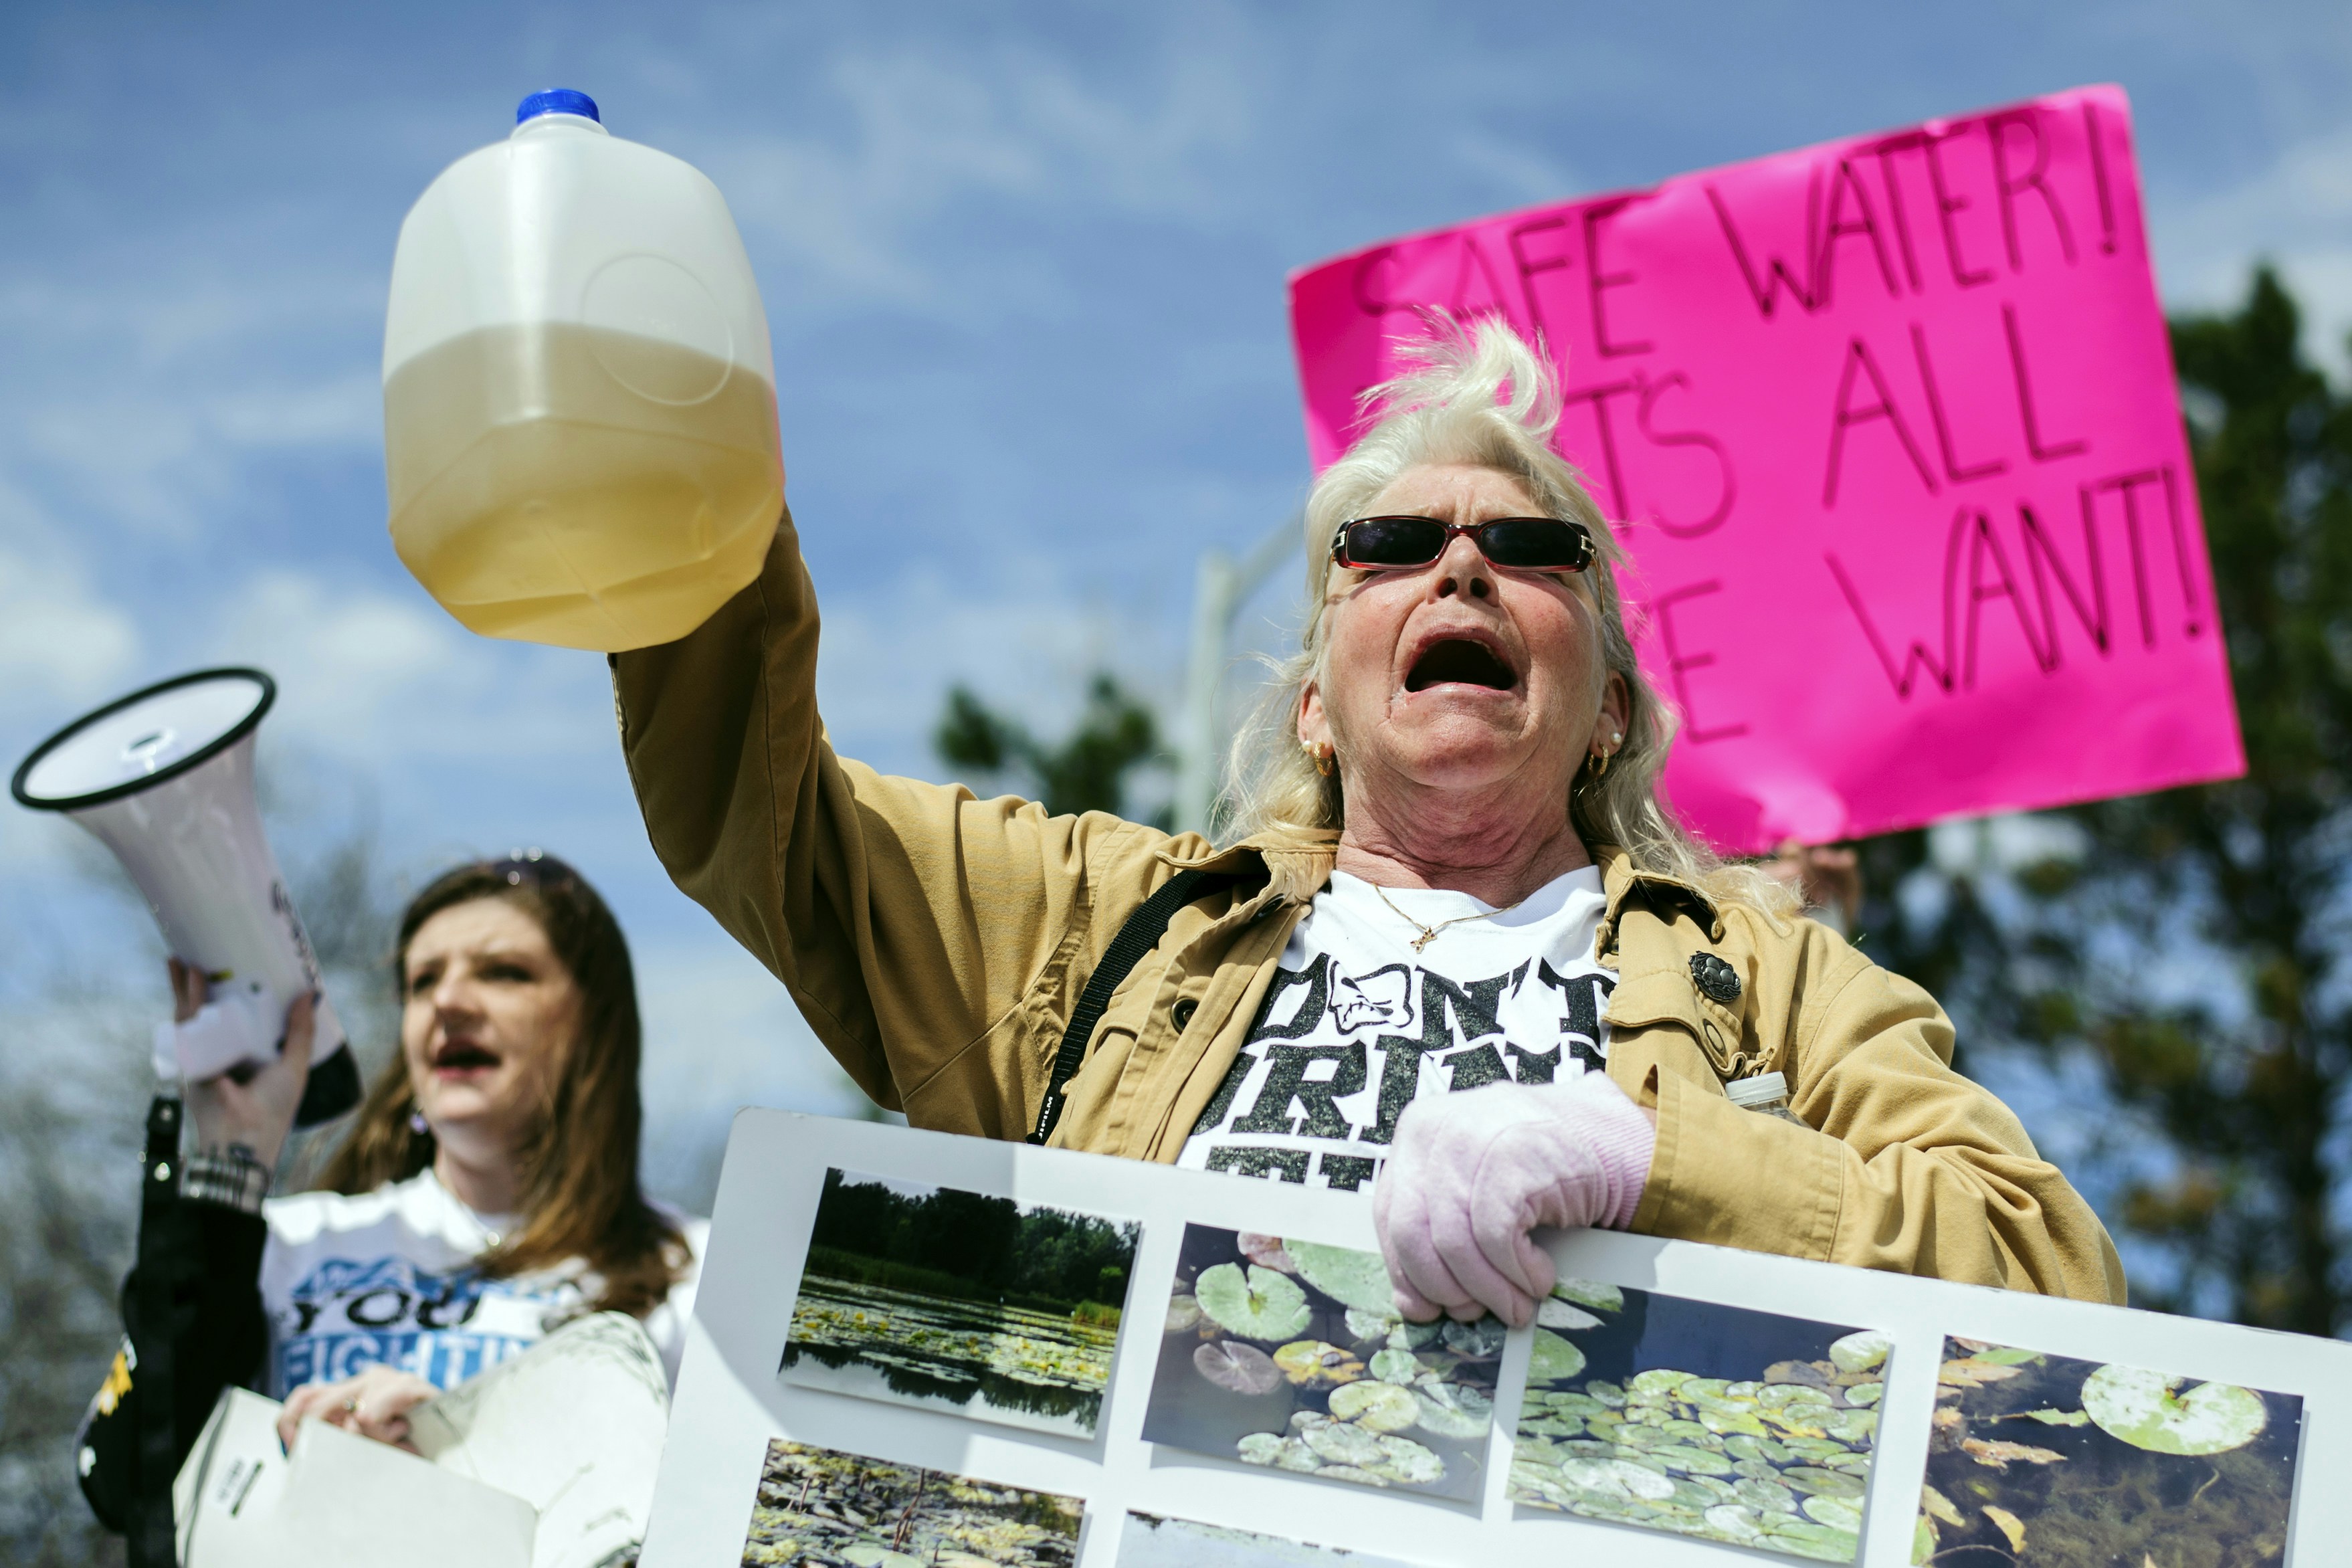 Inside the Flint Water Crisis Cover-Up